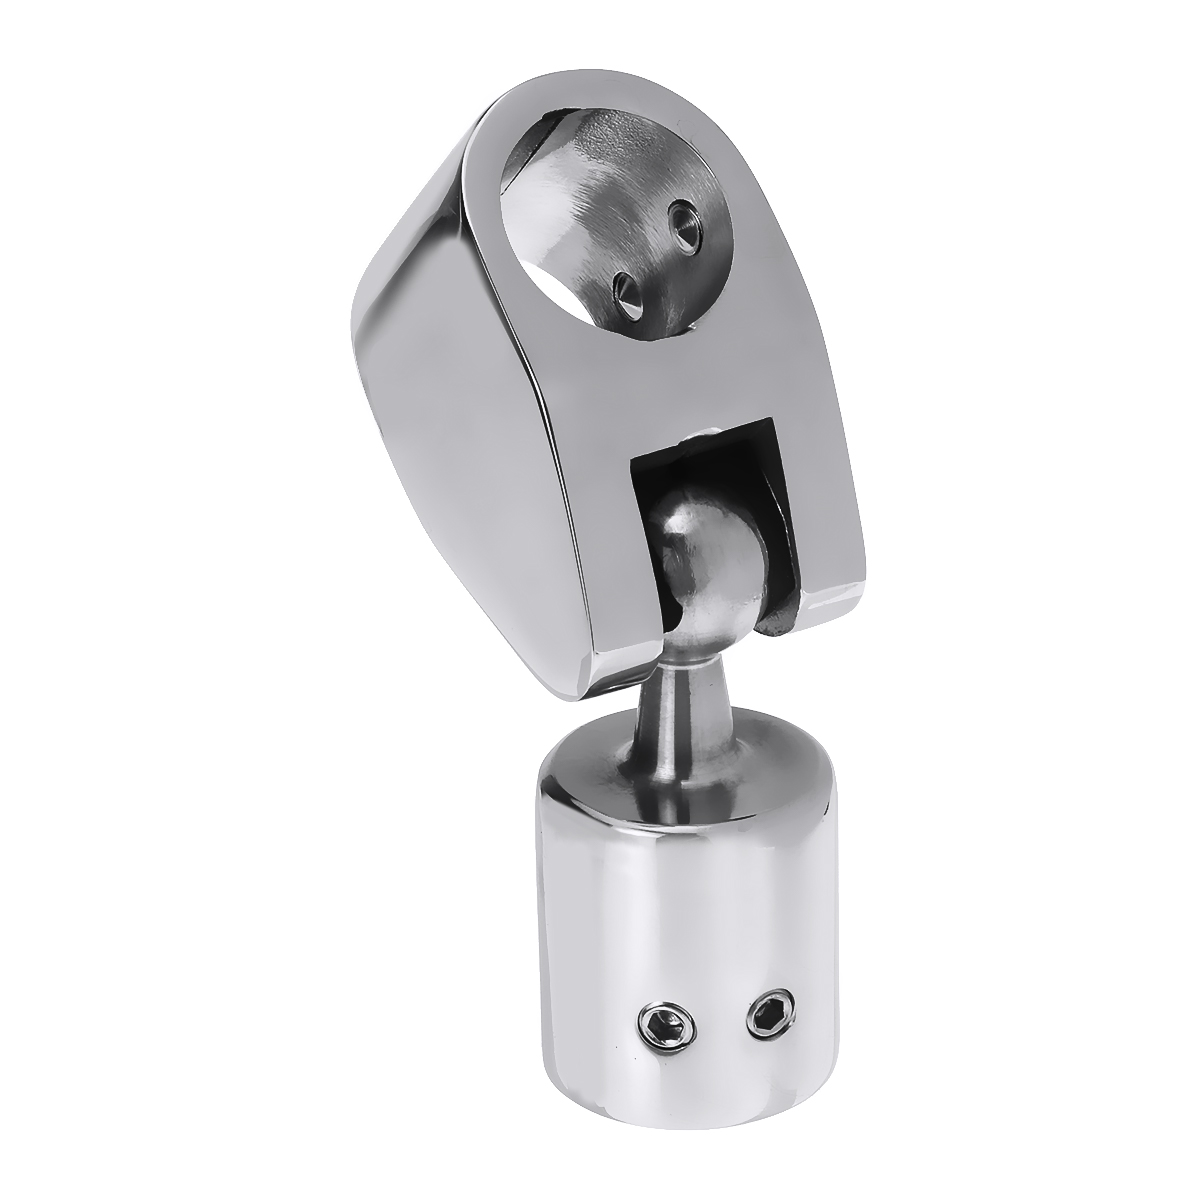 

22mm/25mm Boat Rotating Hinge Connector Stainless Steel Ship Marine Rail Hood Fitting Hardware